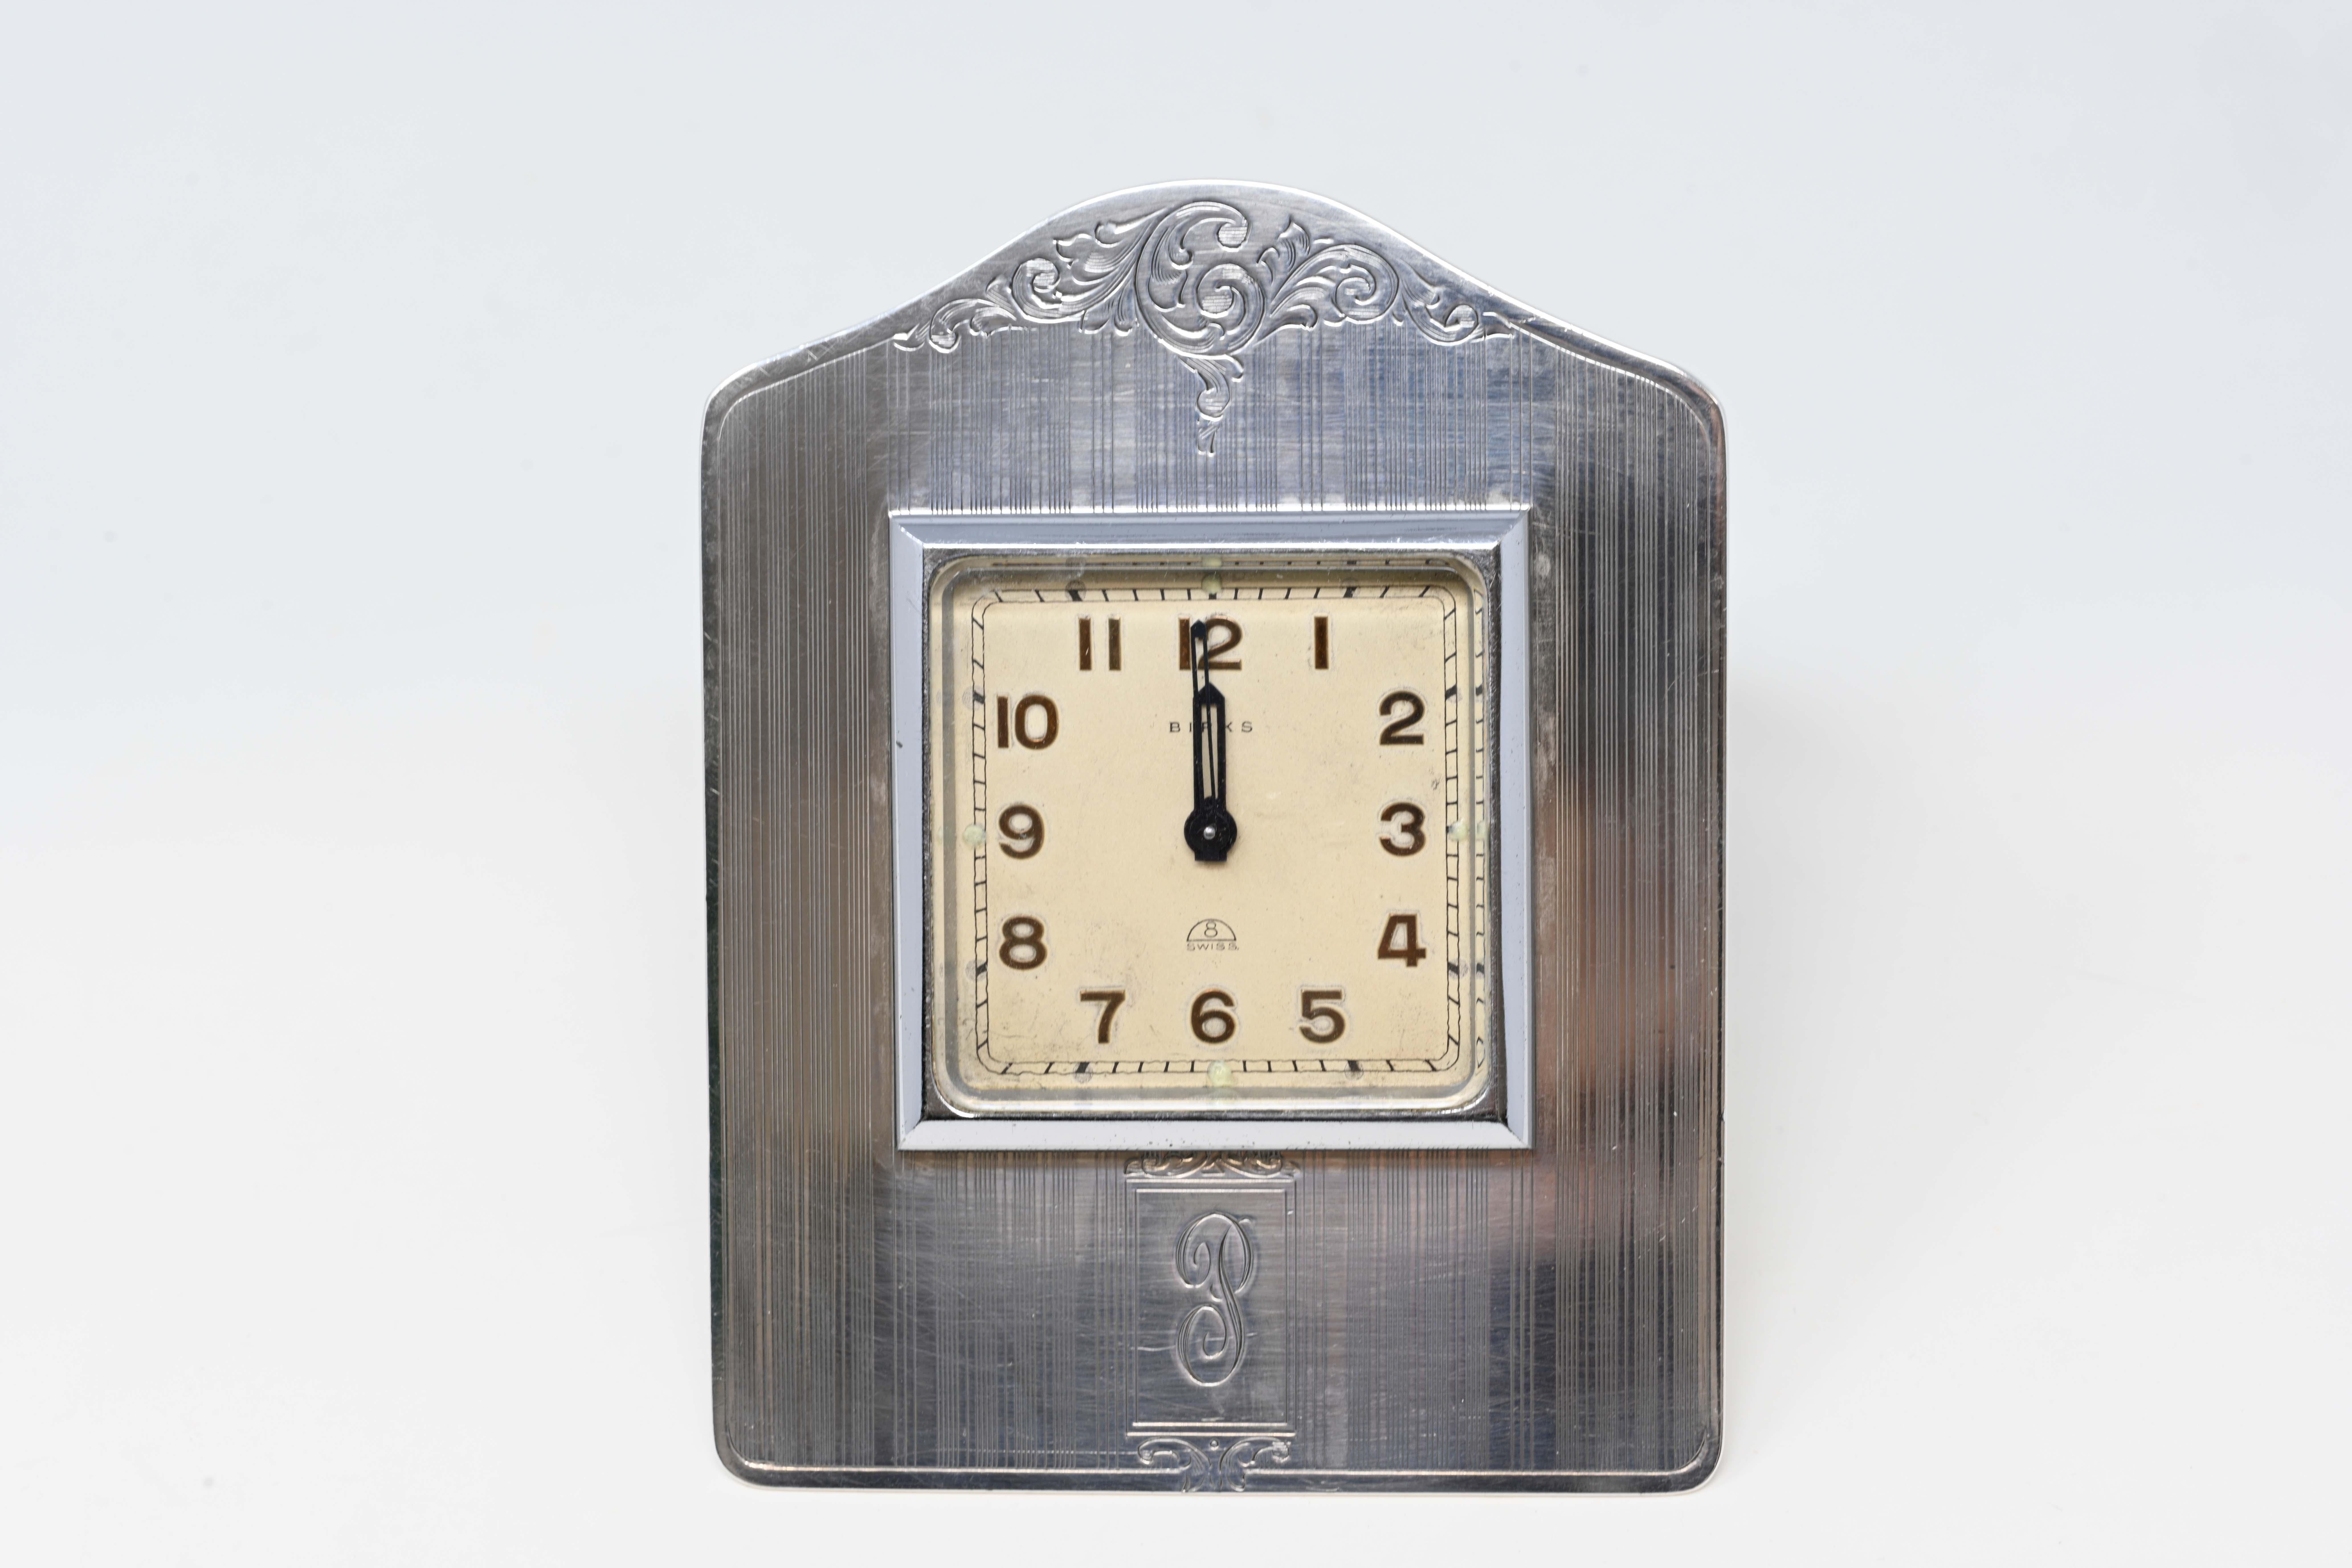 1939 Birks sterling silver desk clock stamped on the back. Movement was made in Switzerland, case was made in Canada. With a white dial and arabic numerals, family monogram on the front. Measures 4 1/2 inches tall x 3 1.2 inches. In good working